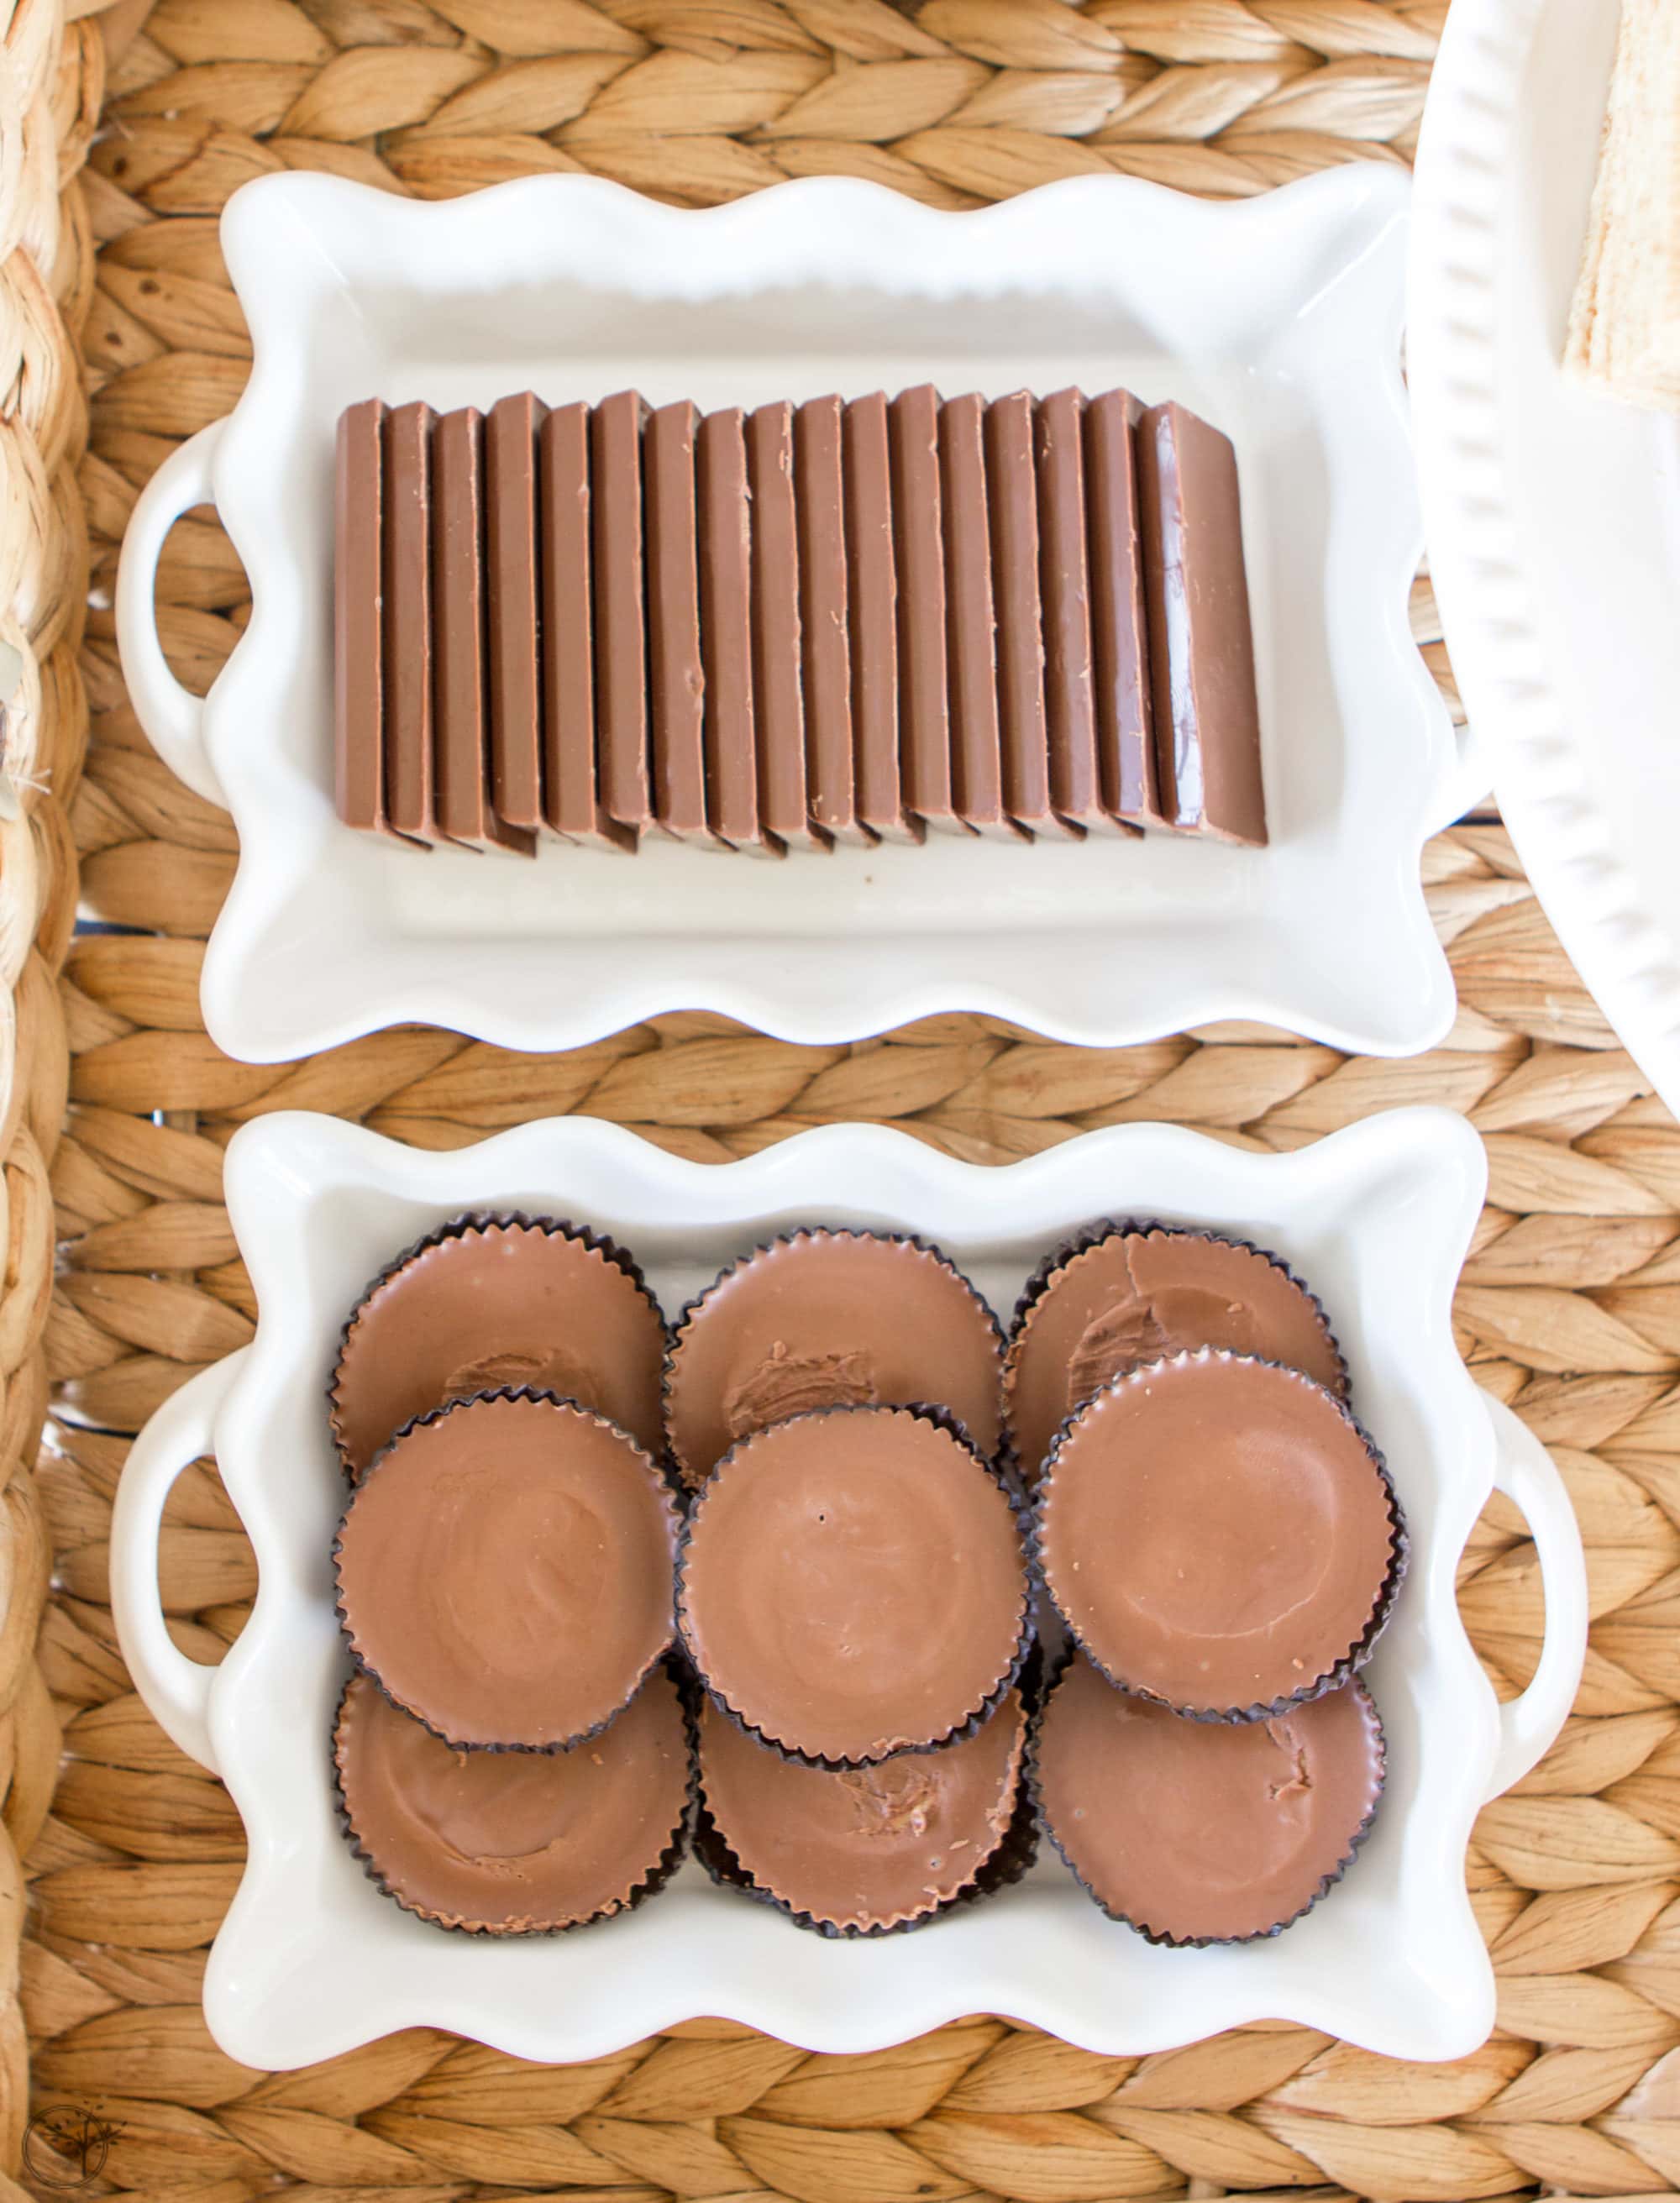 An outdoor s'mores bar cart is a perfectly unexpected way to gather loved ones together for the fall season. #s'mores #s'moresbarcart #outdoorentertainment #smoresrecipe